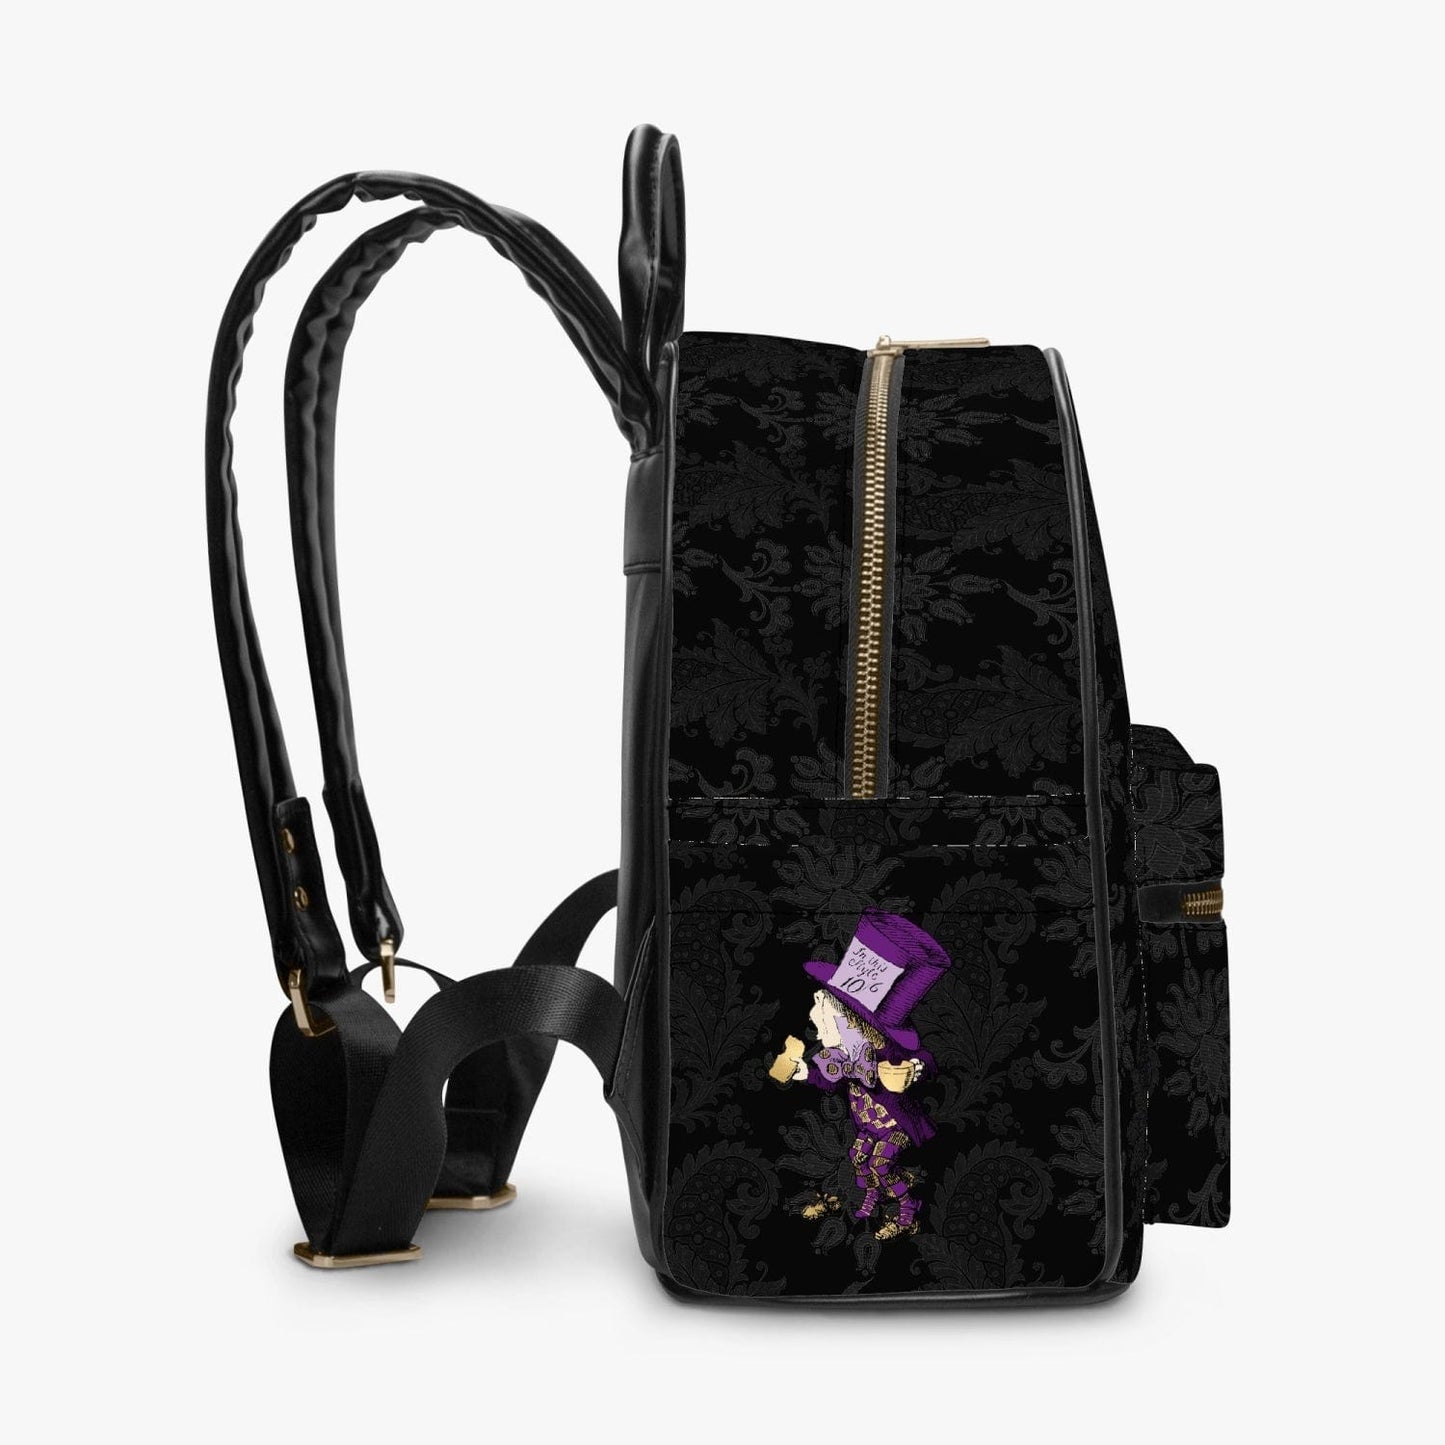 black damask patterned mini backpack featuring Alice in Wonderland characters in purples and lilacs with a famous Alice quote printed on the front, side view showing the strong and stylish back straps